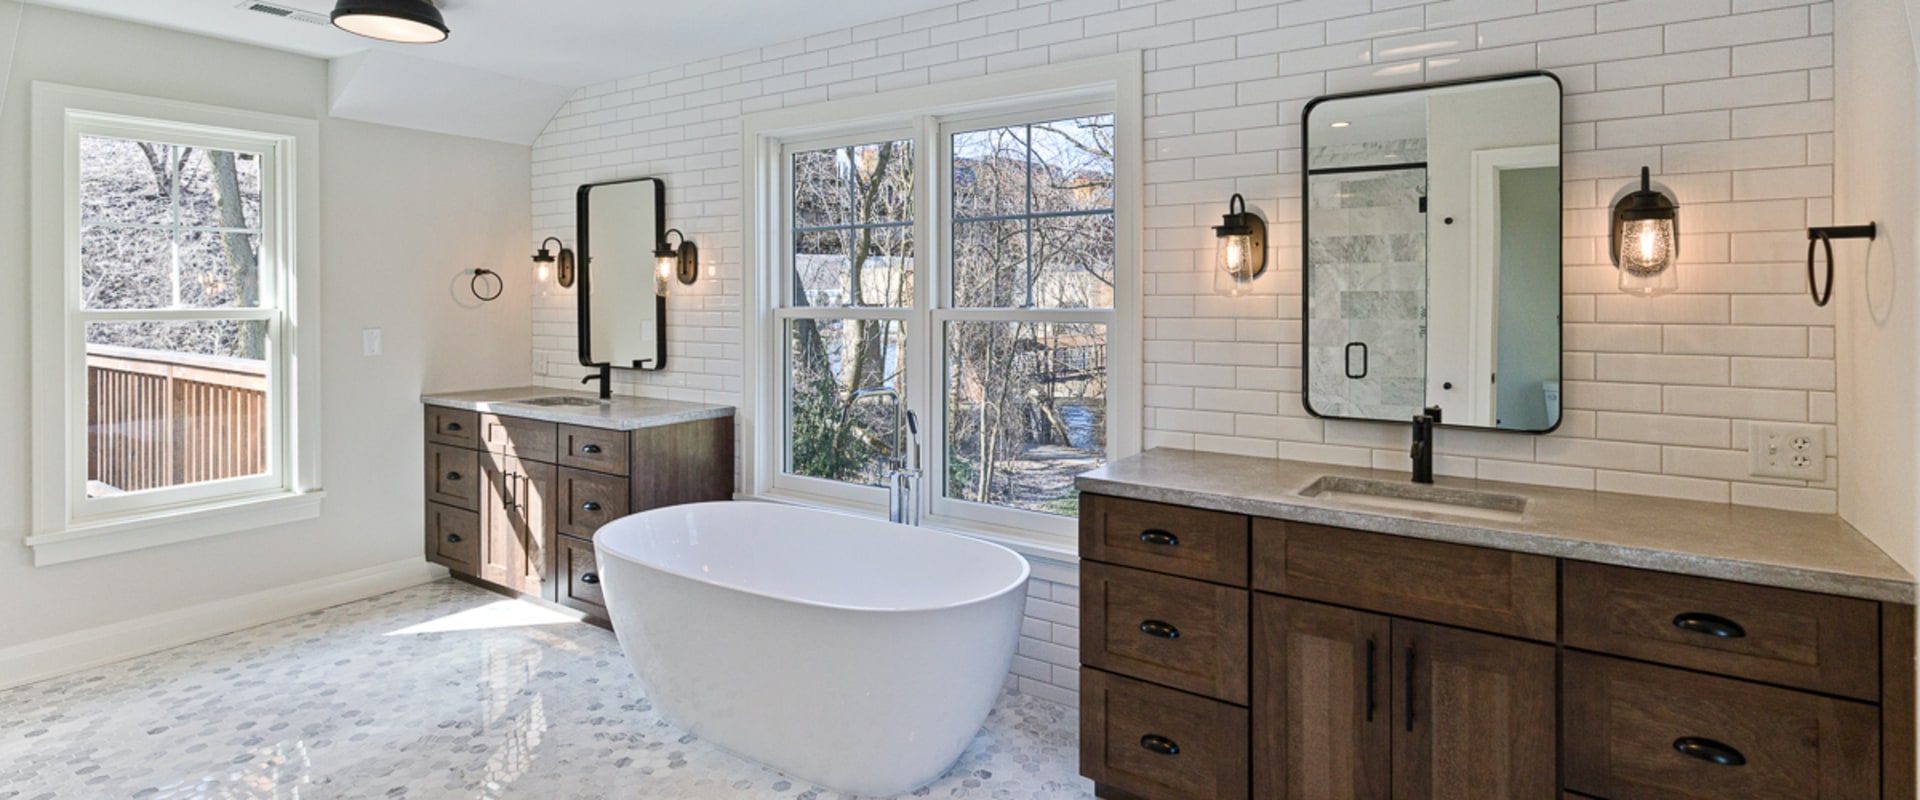 The Ultimate Guide to Completing a Bathroom Remodel in Just One Week